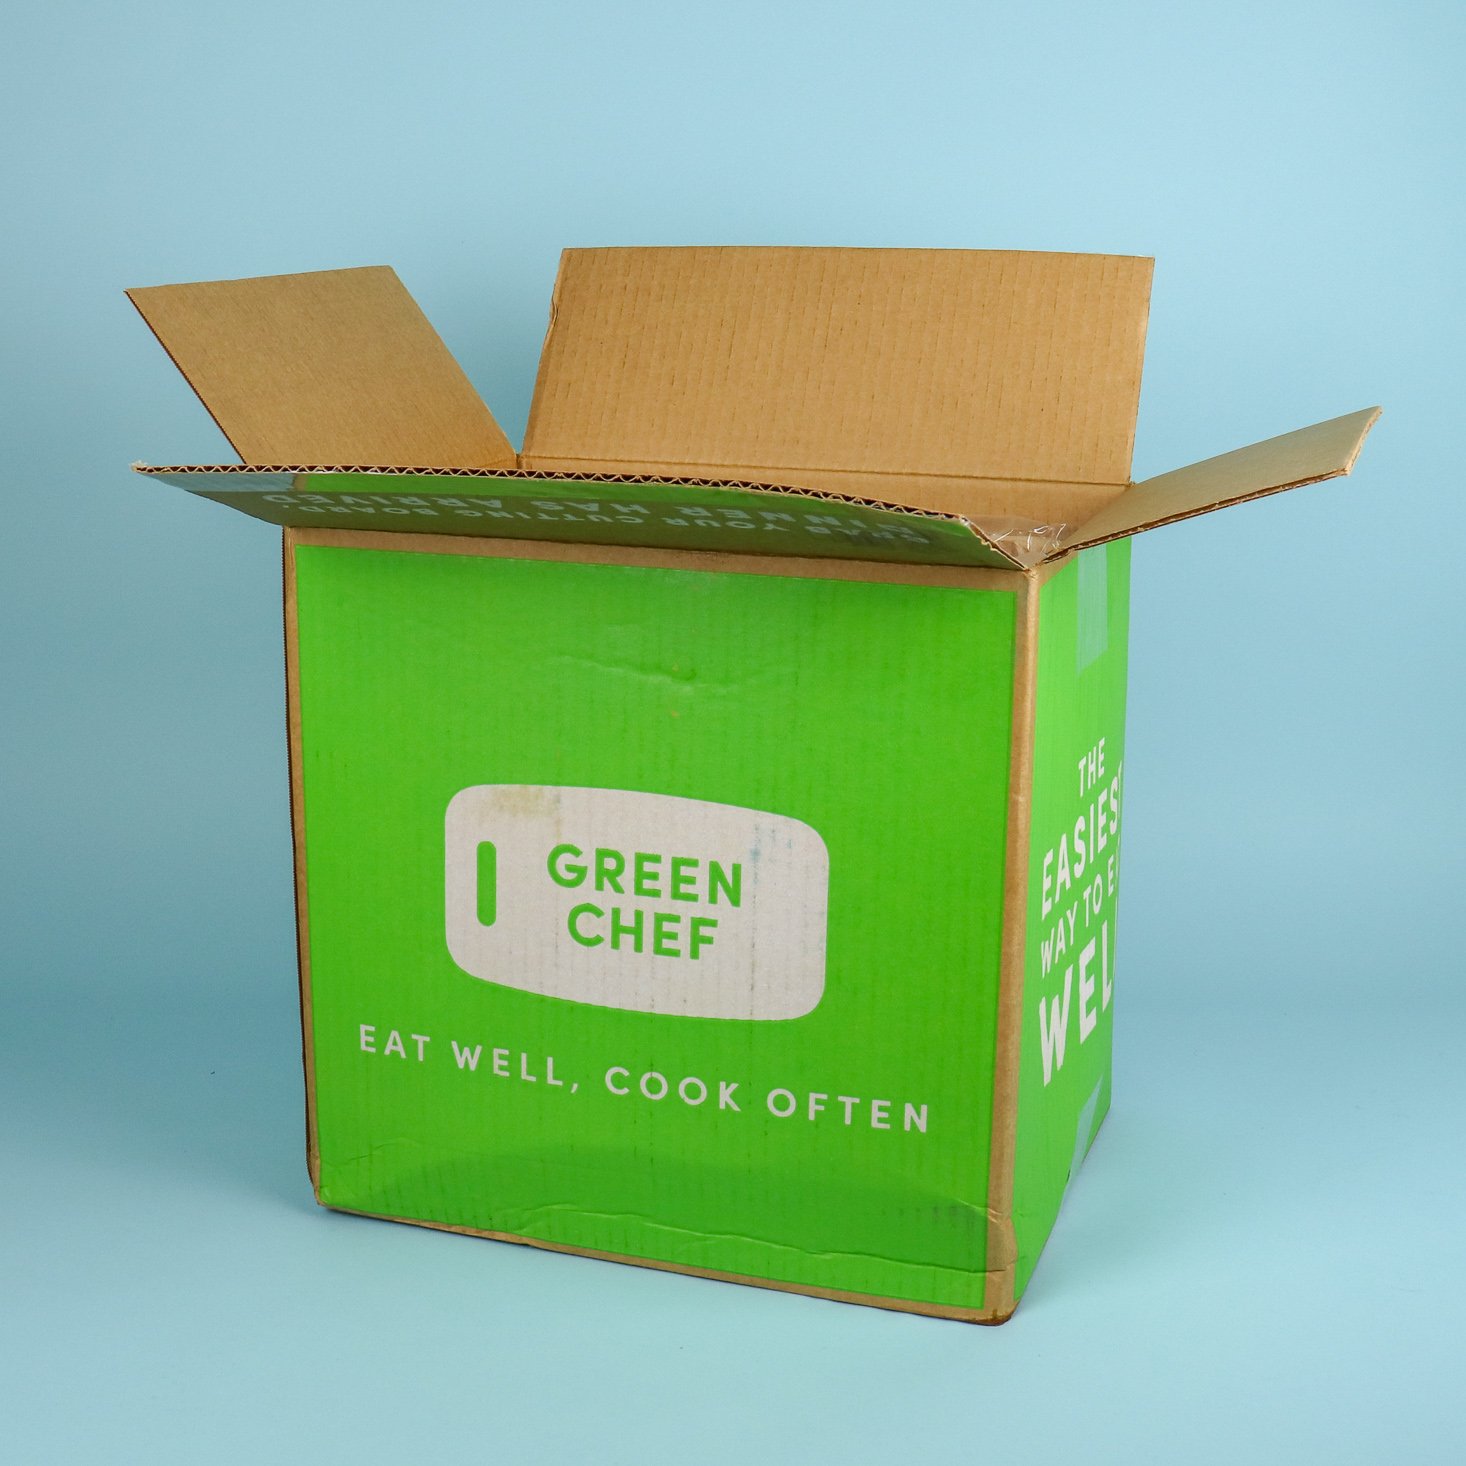 My Honest Green Chef Keto Meal Box Review with Recipes